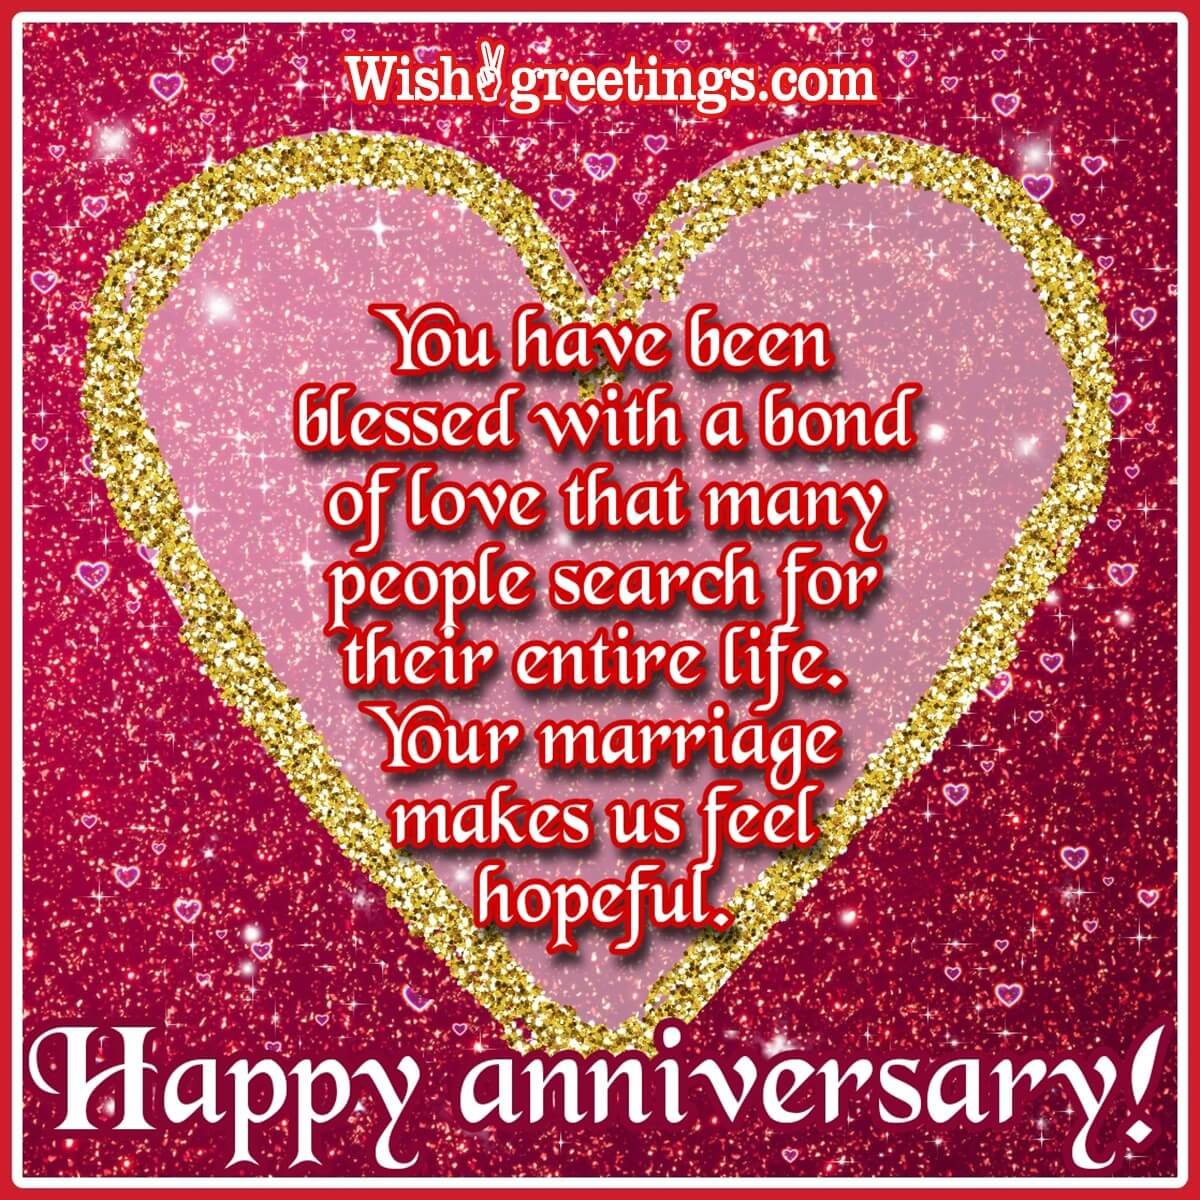 Happy Anniversary Messages - Wish Greetings